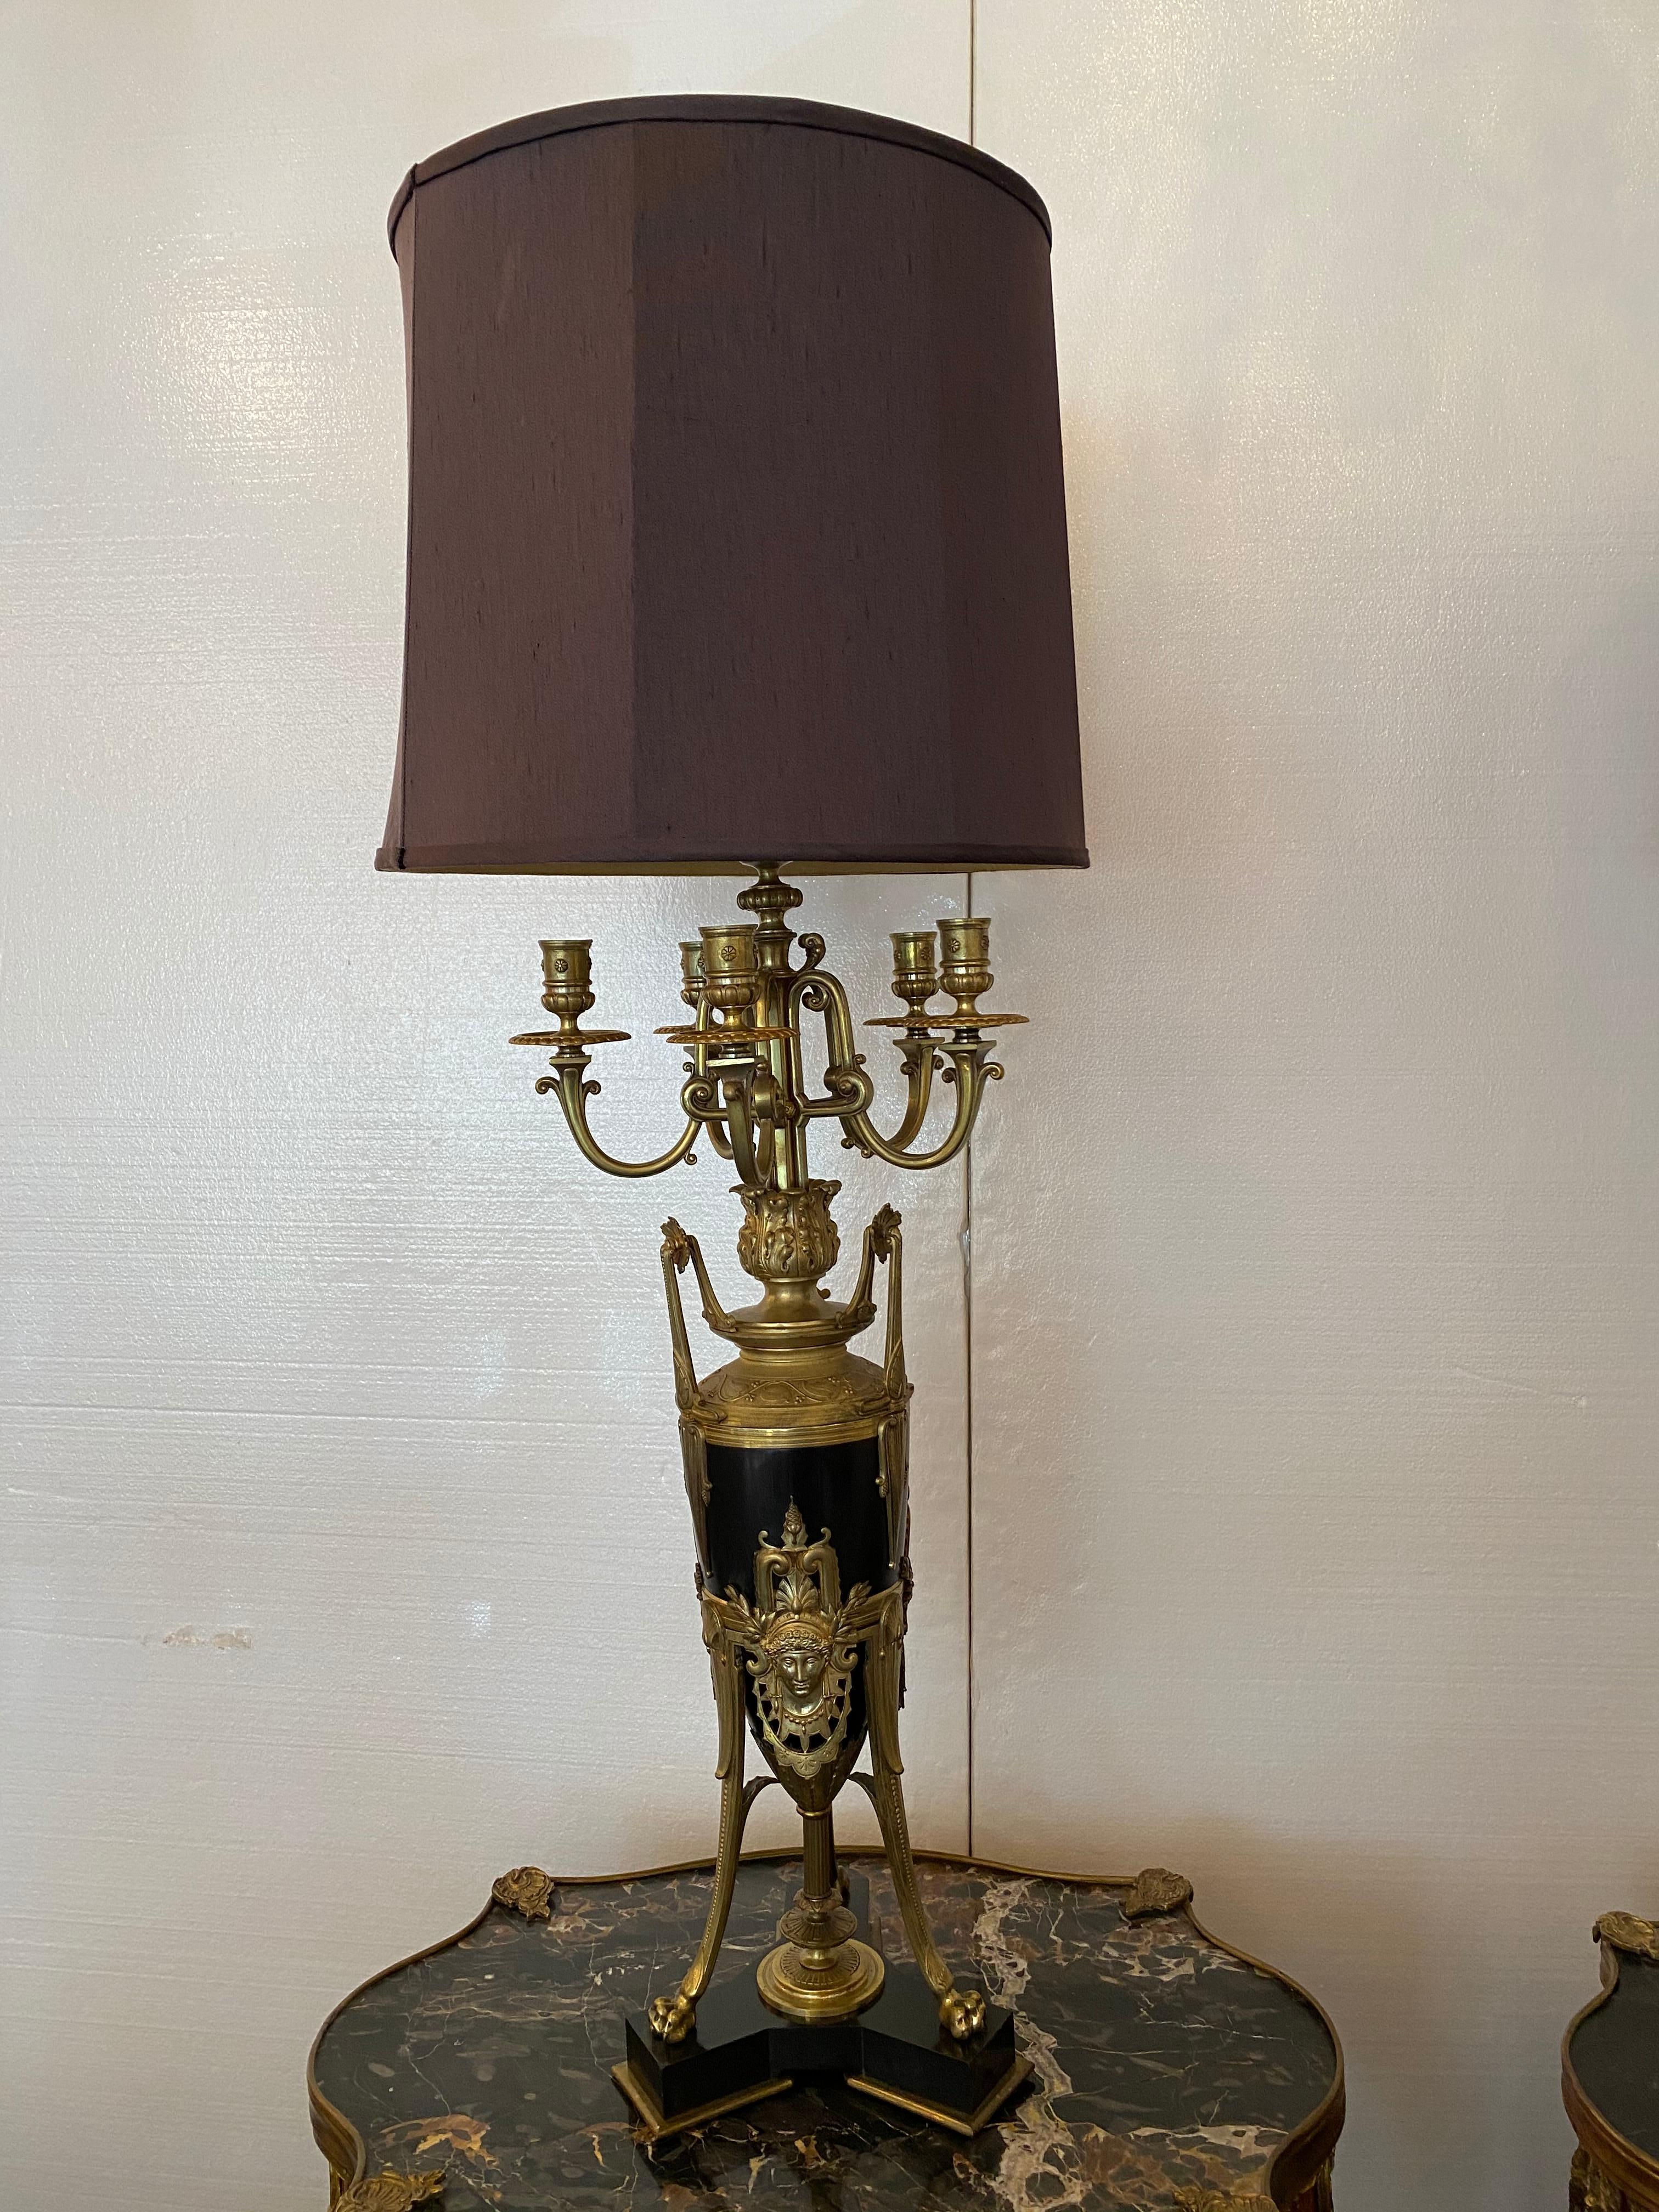 High quality gilt bronze electrified candelabra lamps. Six-light design with elaborate high floral and scrolled relief decoration. Fixed to a black marble base. Good overall condition with minor wear. Measures: 28 1/4 in. x 11 in. x 11in., and 43